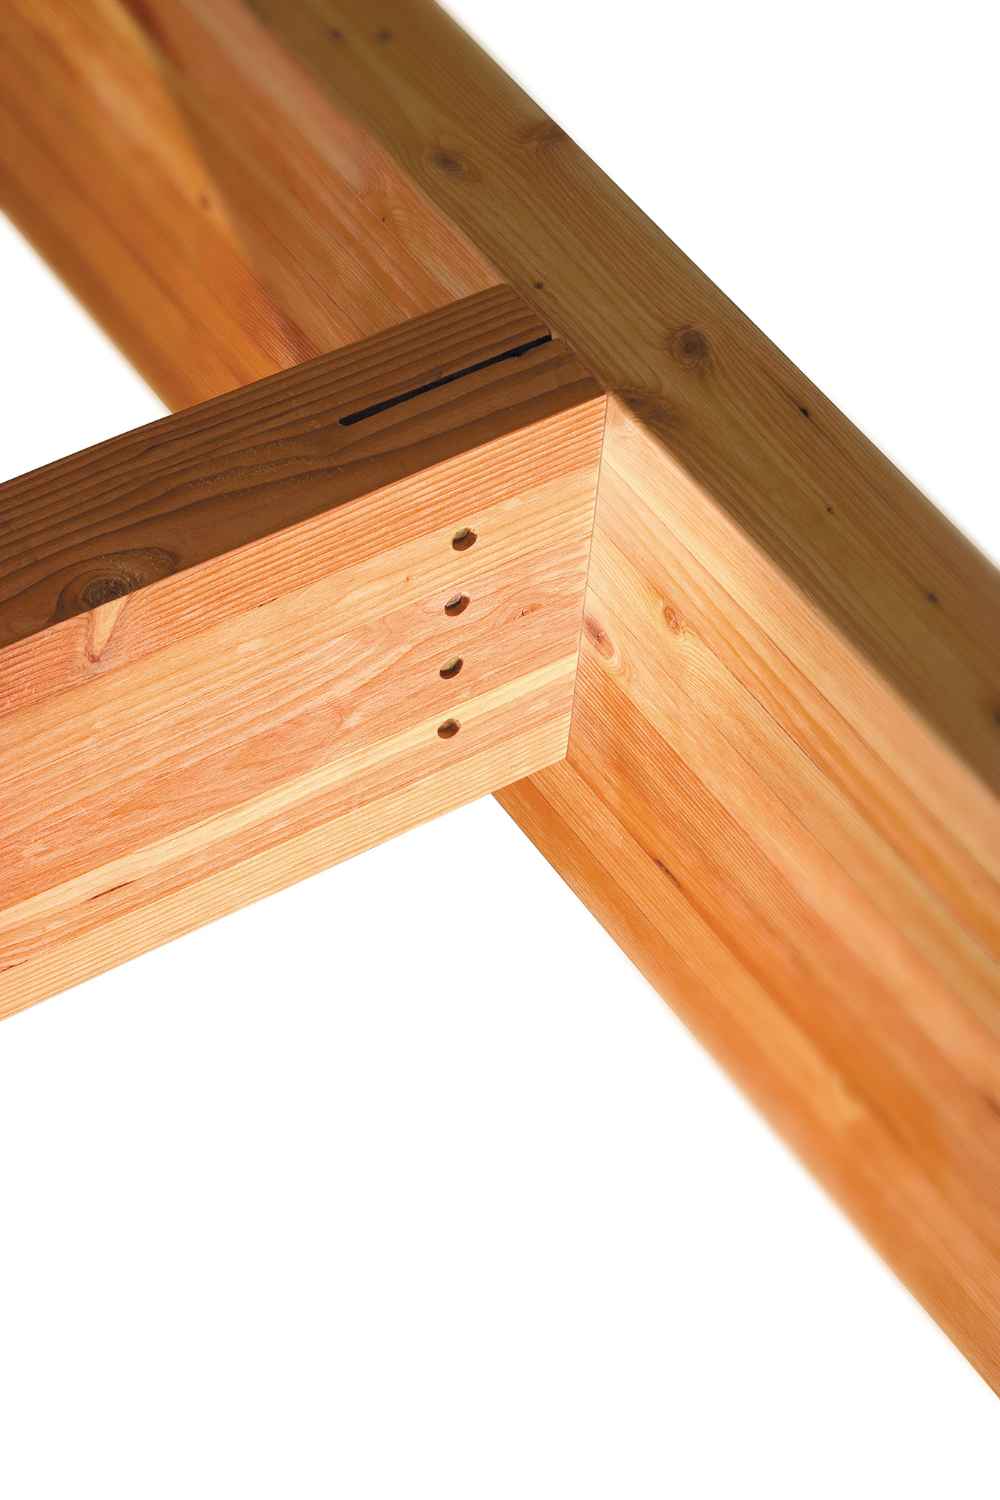 Simpson CJT3ZL Concealed Joist Tie w Long Pins ZMAX Finish image 4 of 5